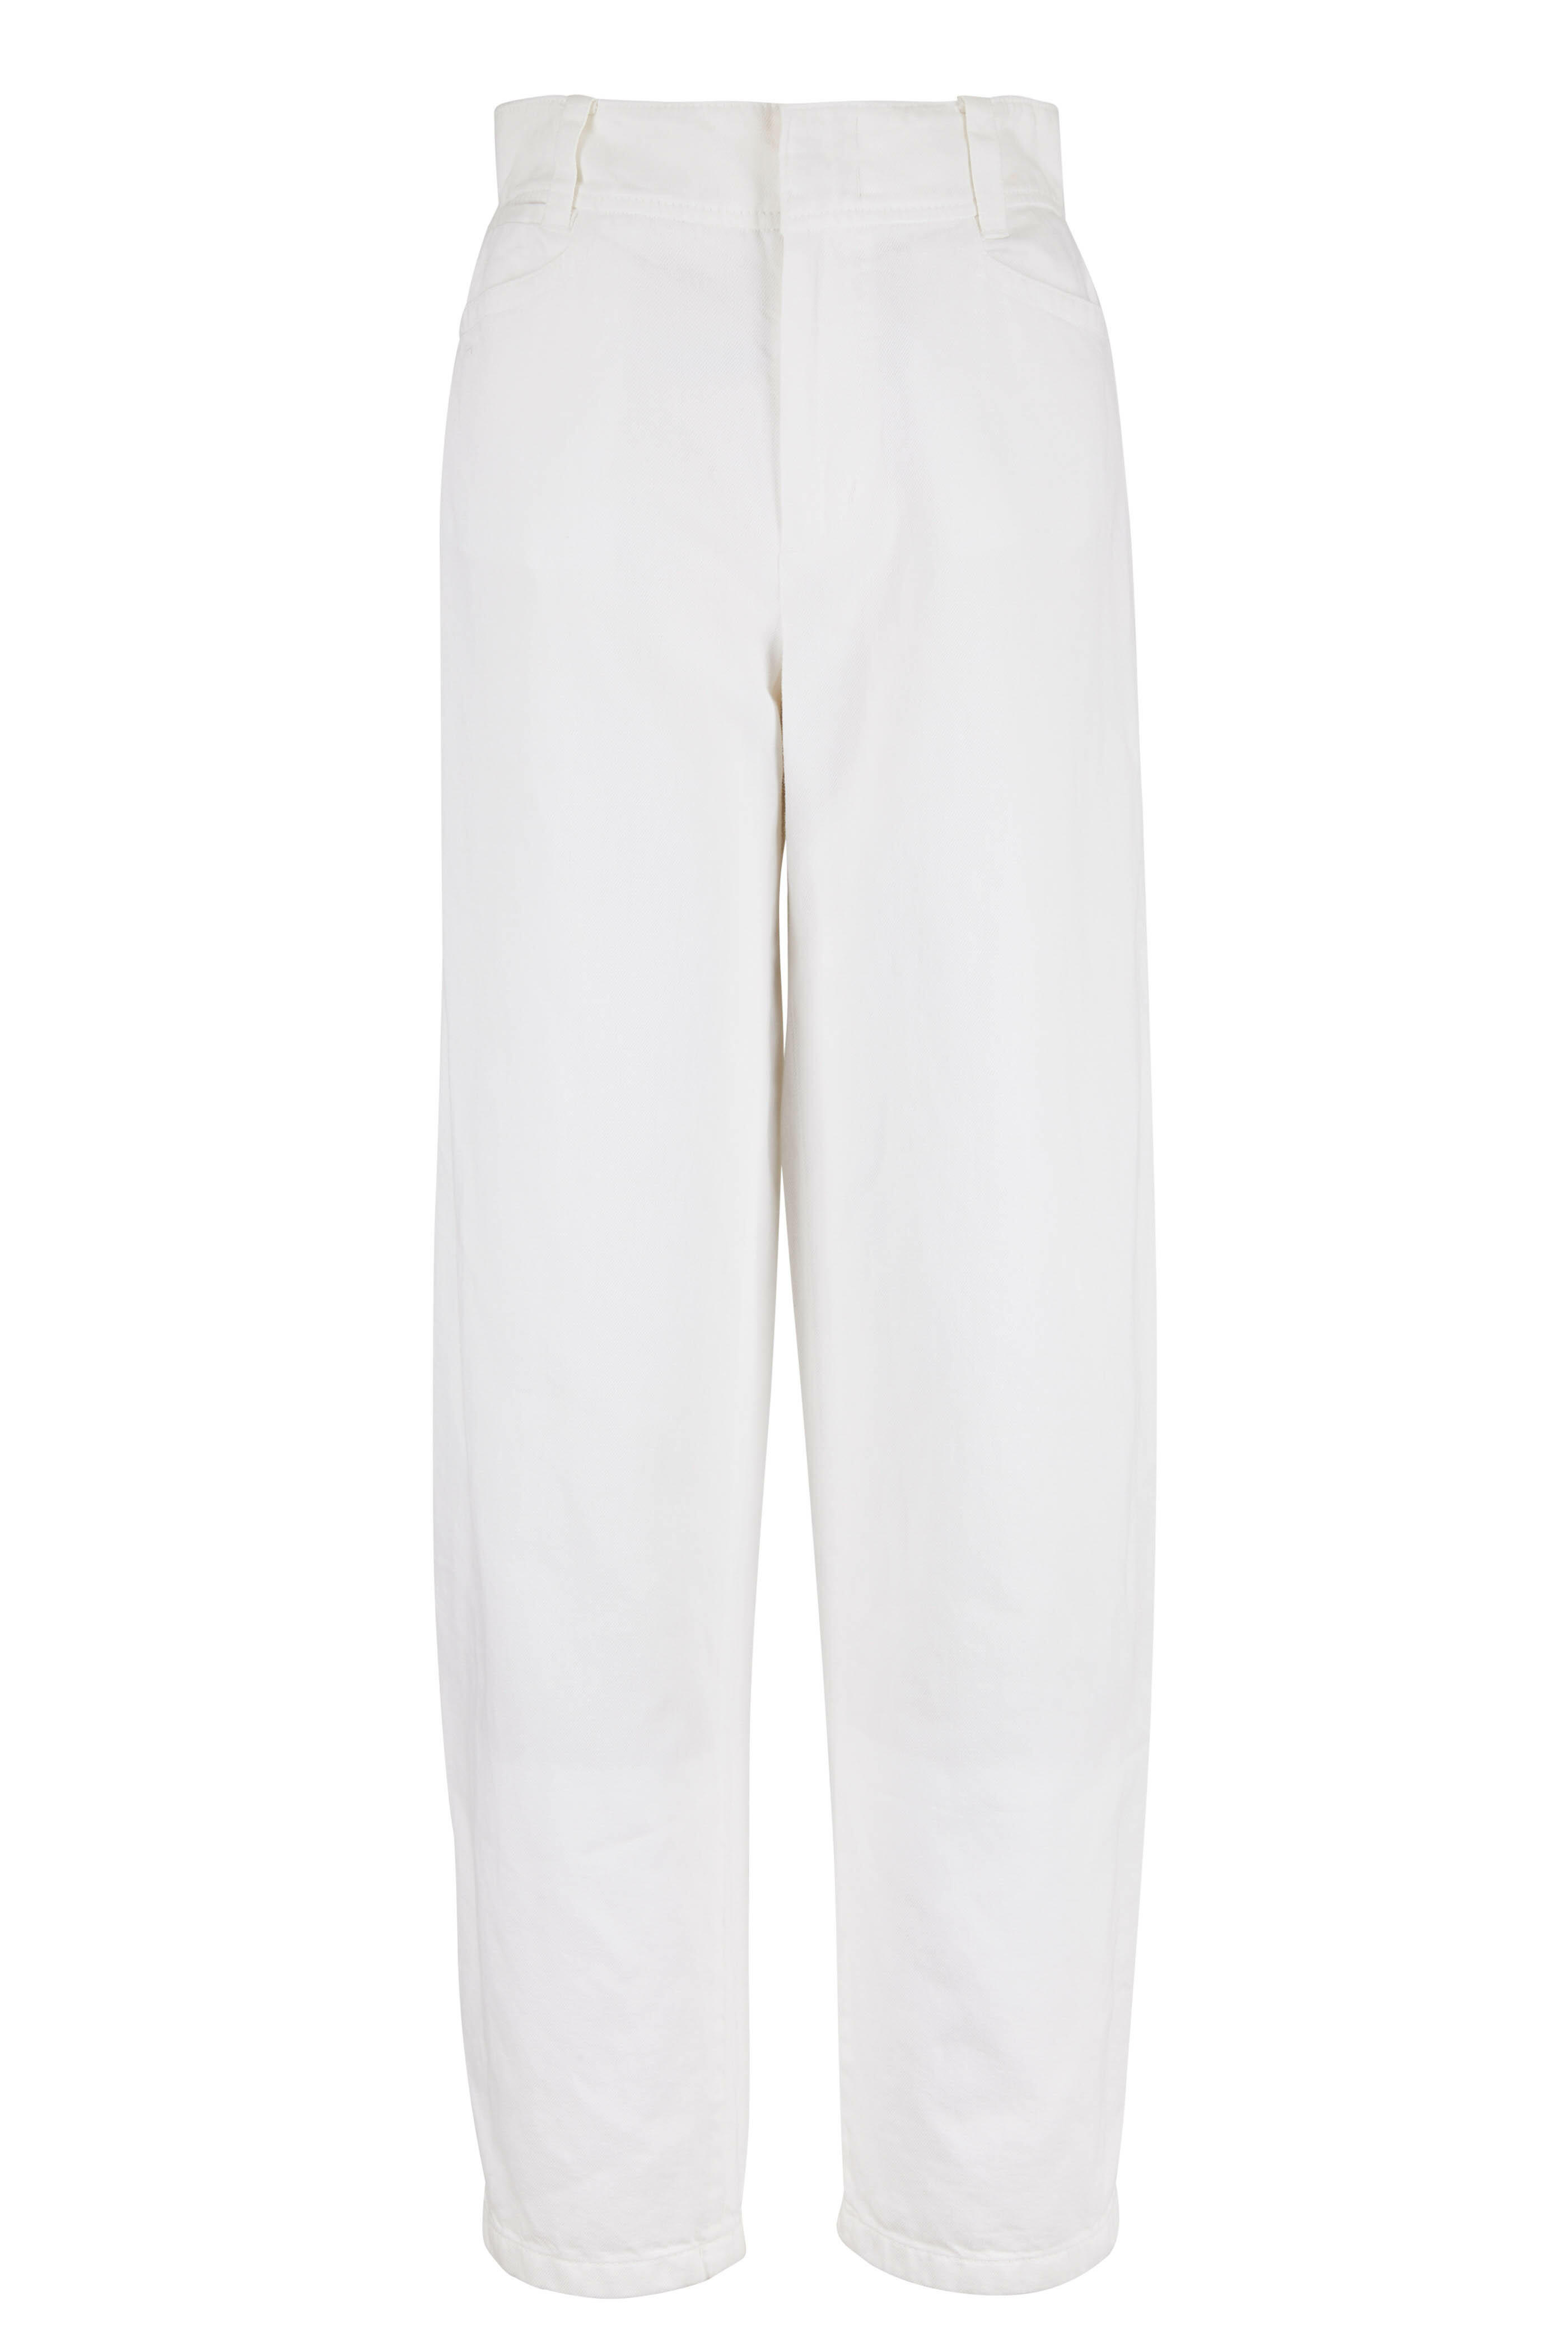 Vince - Off White Washed Casual Pant | Mitchell Stores